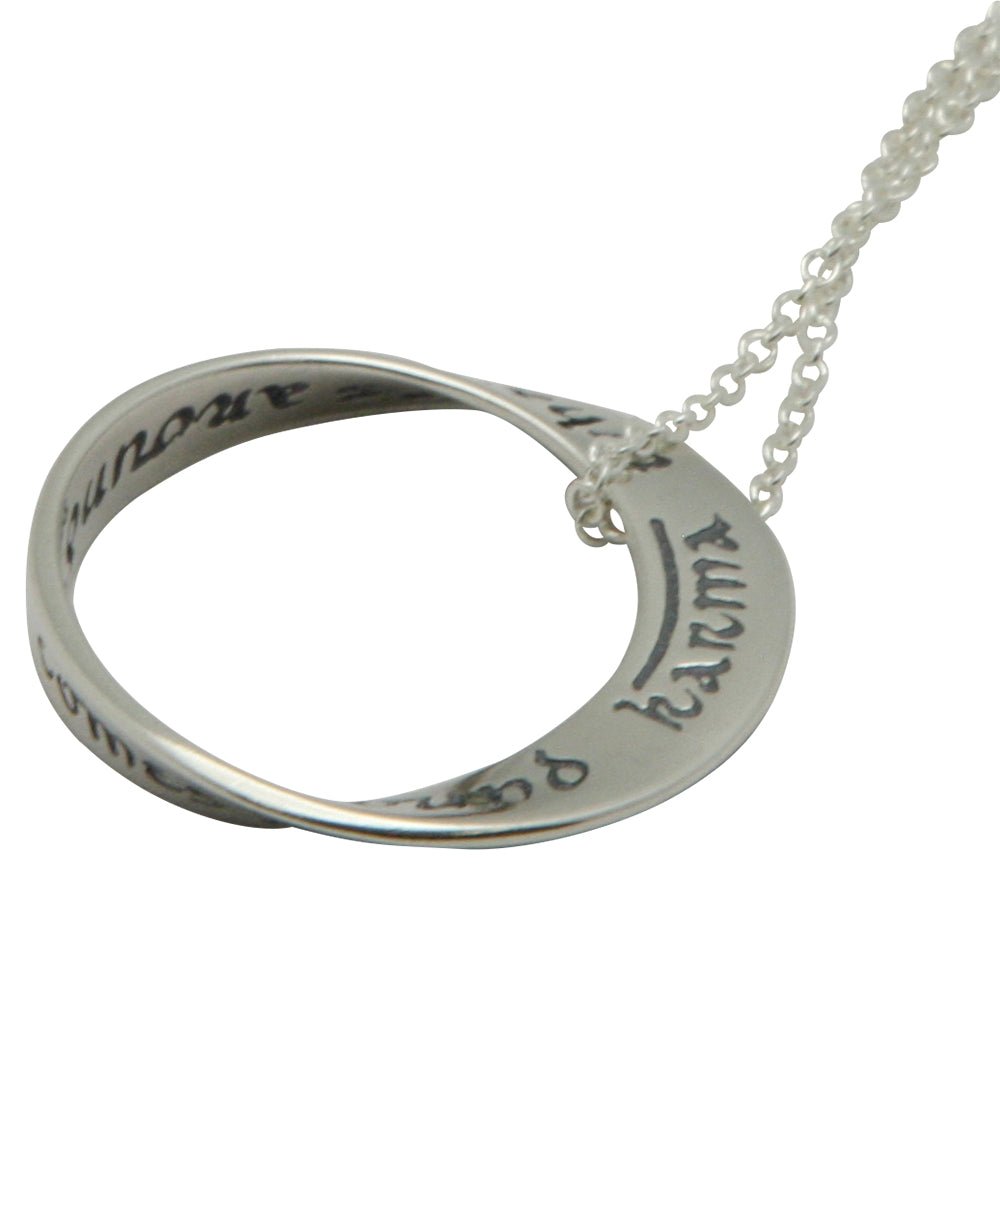 Karmic Loop Necklace, What Goes Around Comes Around - Necklaces